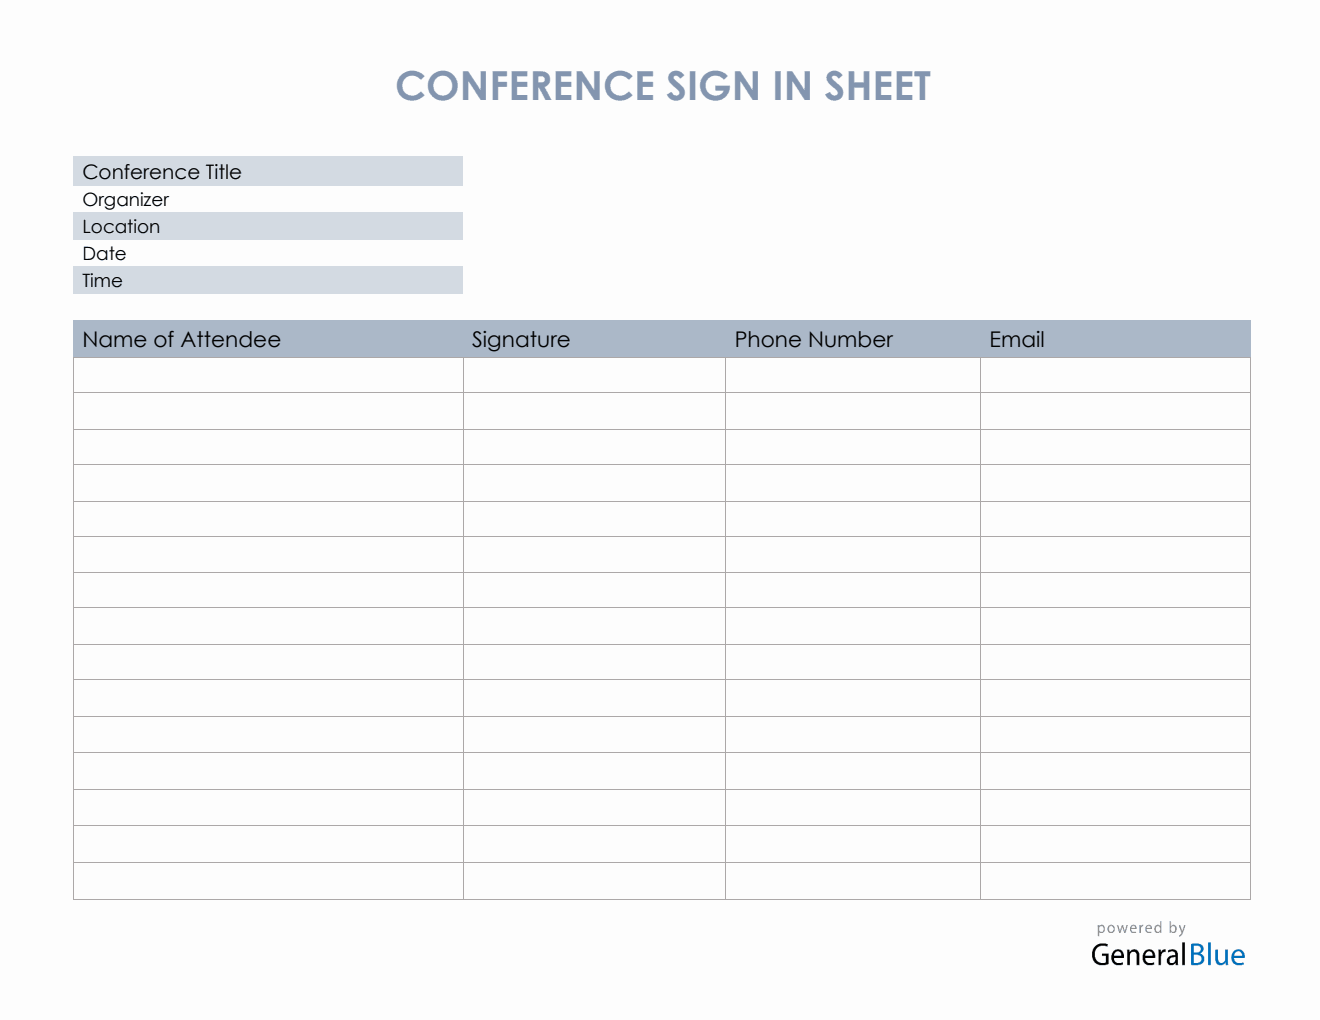 Conference Sign In Sheet in Word